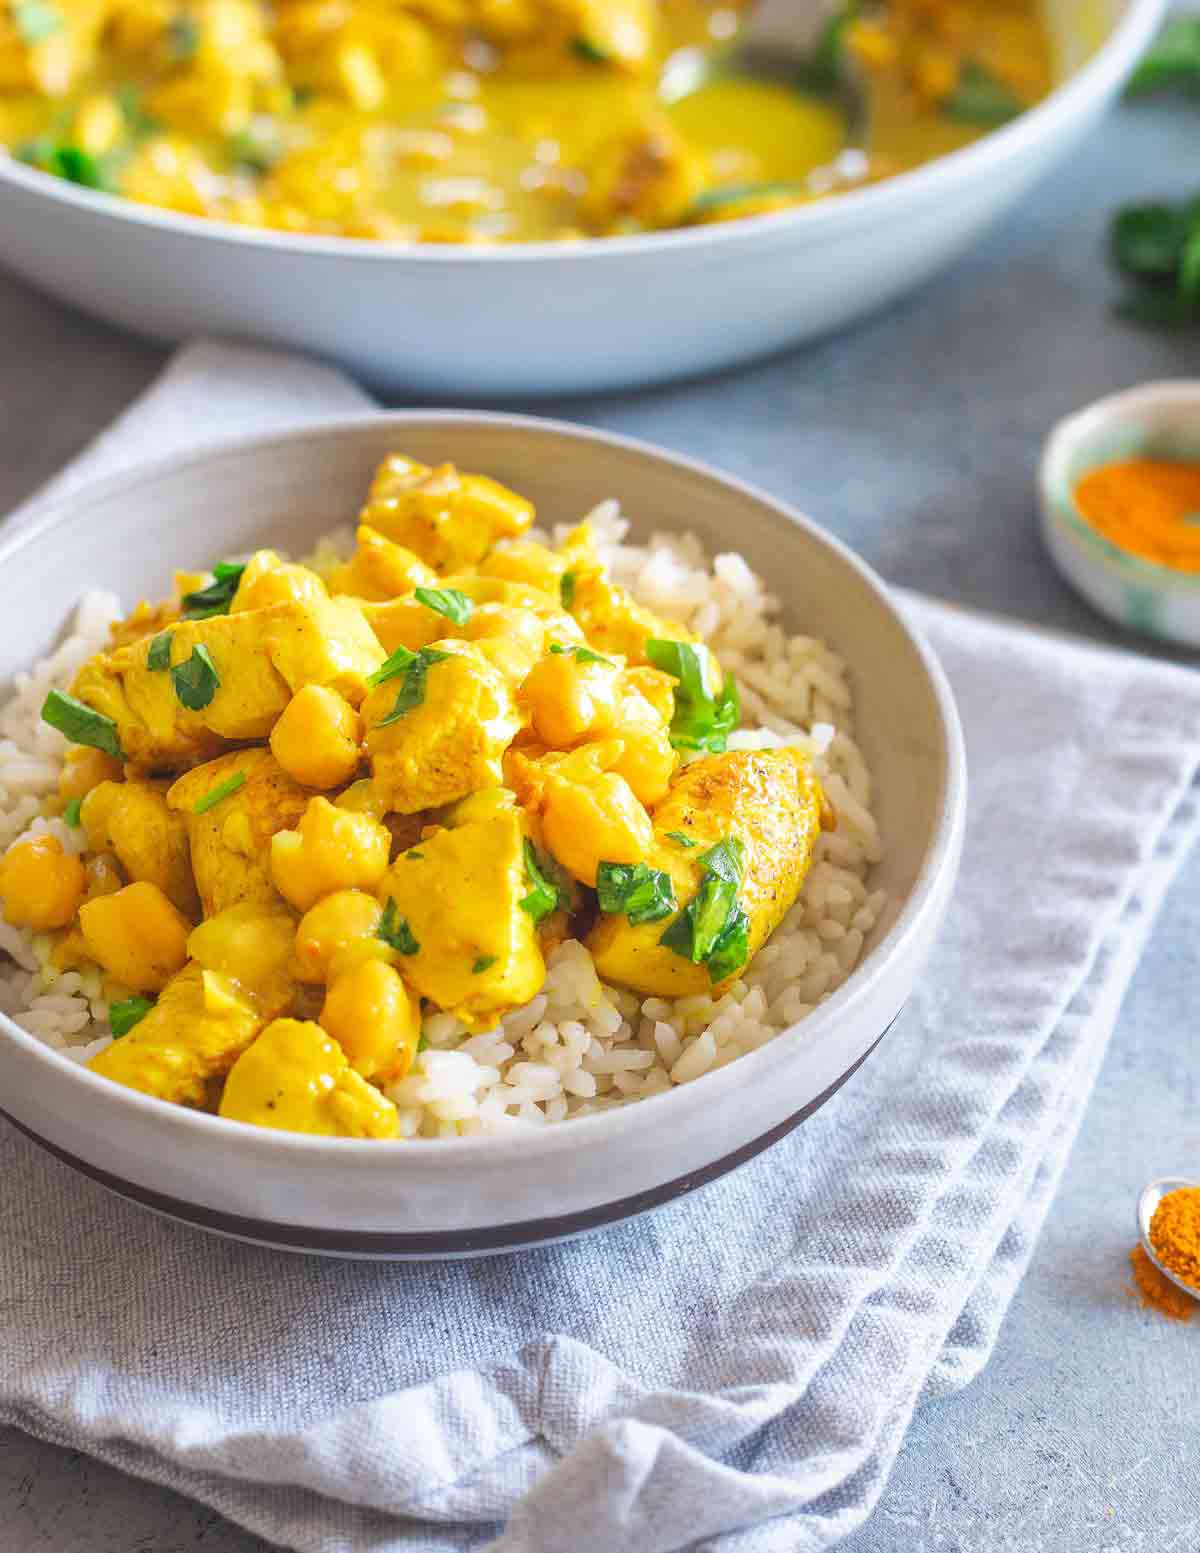 This creamy turmeric chicken is an easy one-skillet meal with hearty chickpeas. Serve it over rice with a cilantro garnish for a delicious dinner in under 30 minutes.